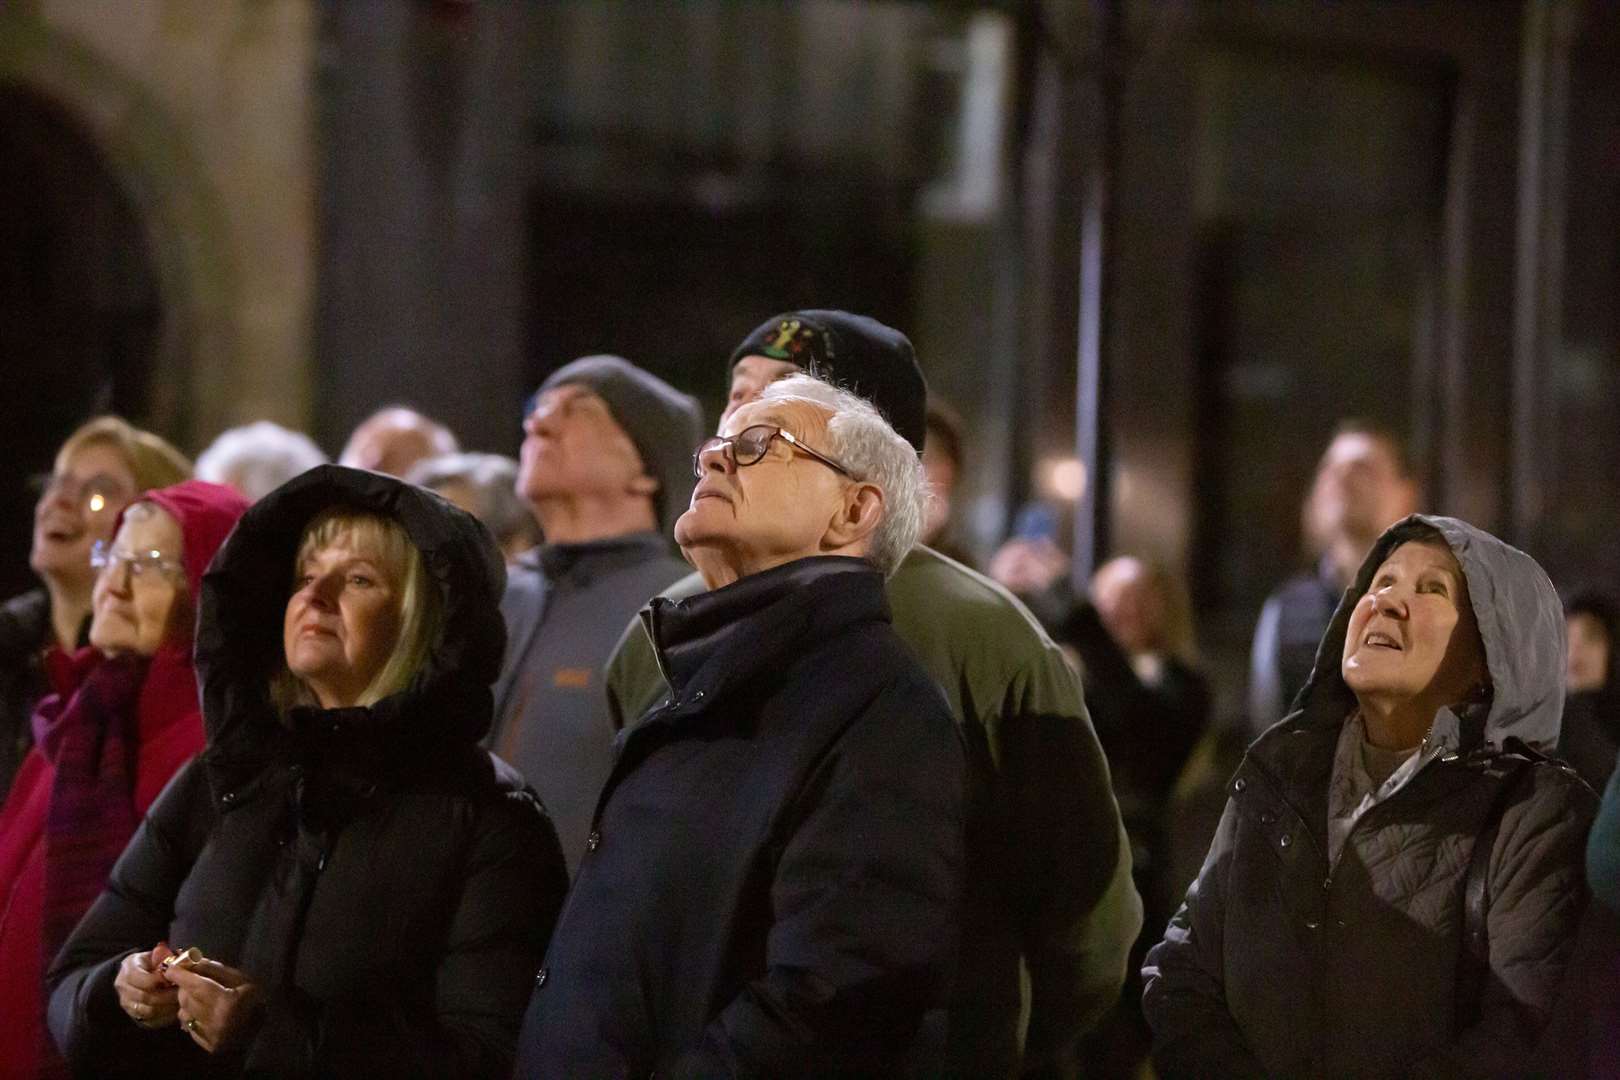 Lorraine and Bill Budge, and Mary Stuart admiring the Tolbooth lights.